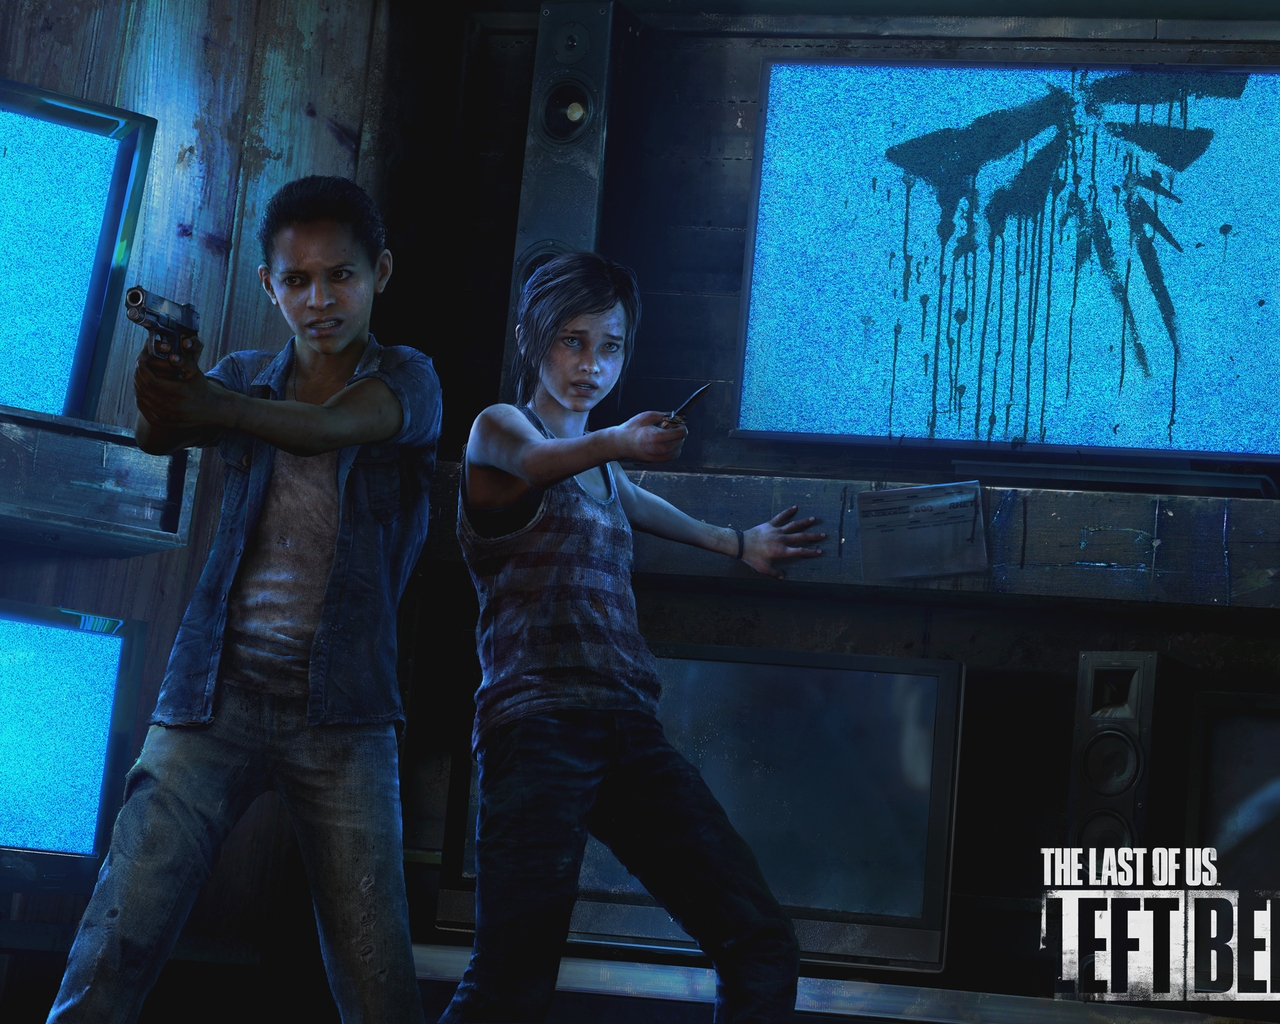 The Last Of Us Left Behind for 1280 x 1024 resolution